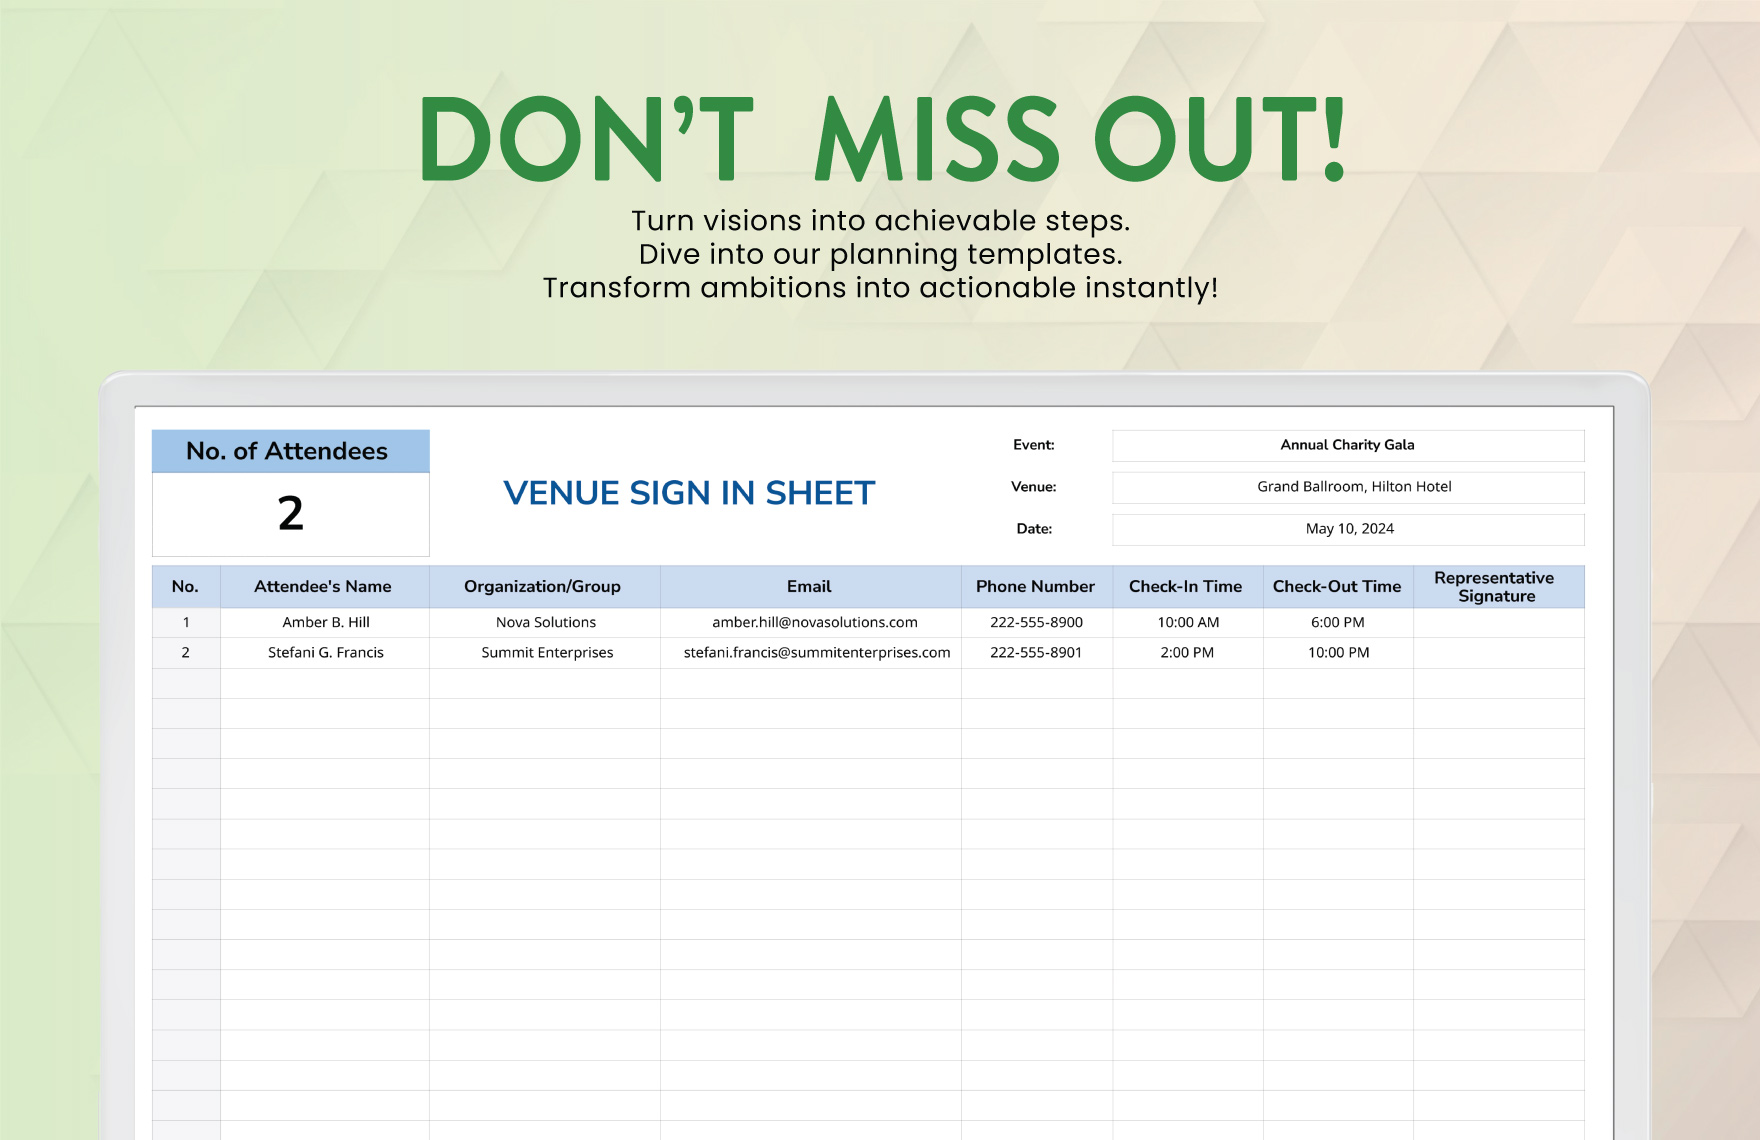 Venue Sign in Sheet Template